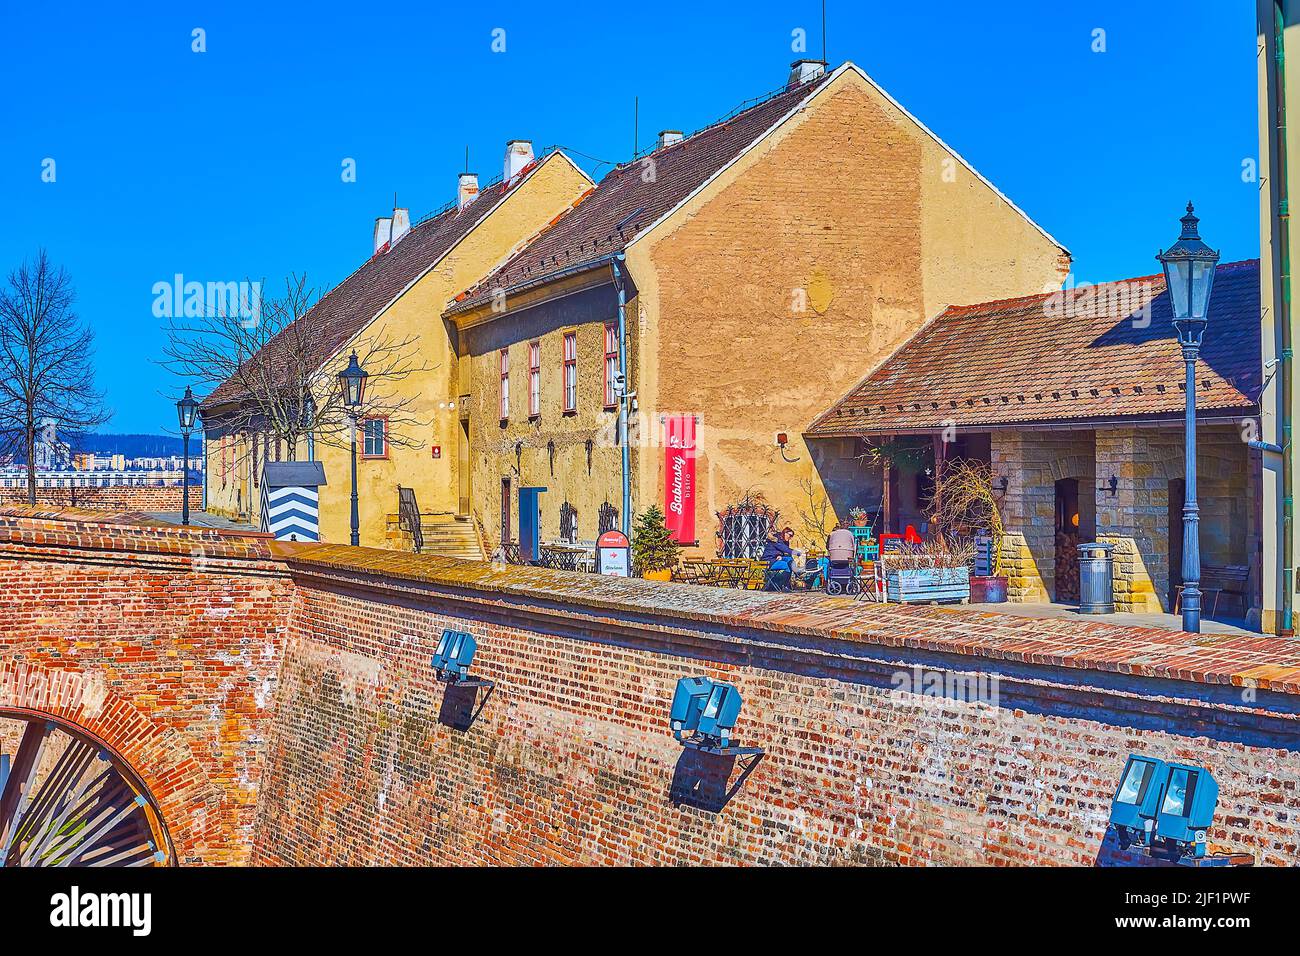 BRNO, CZECH REPUBLIC - MARCH 10, 2022: The small local restaurant with outdoor terrace on the yard of Spilberk Castle, on March 10 in Brno, Czech Repu Stock Photo